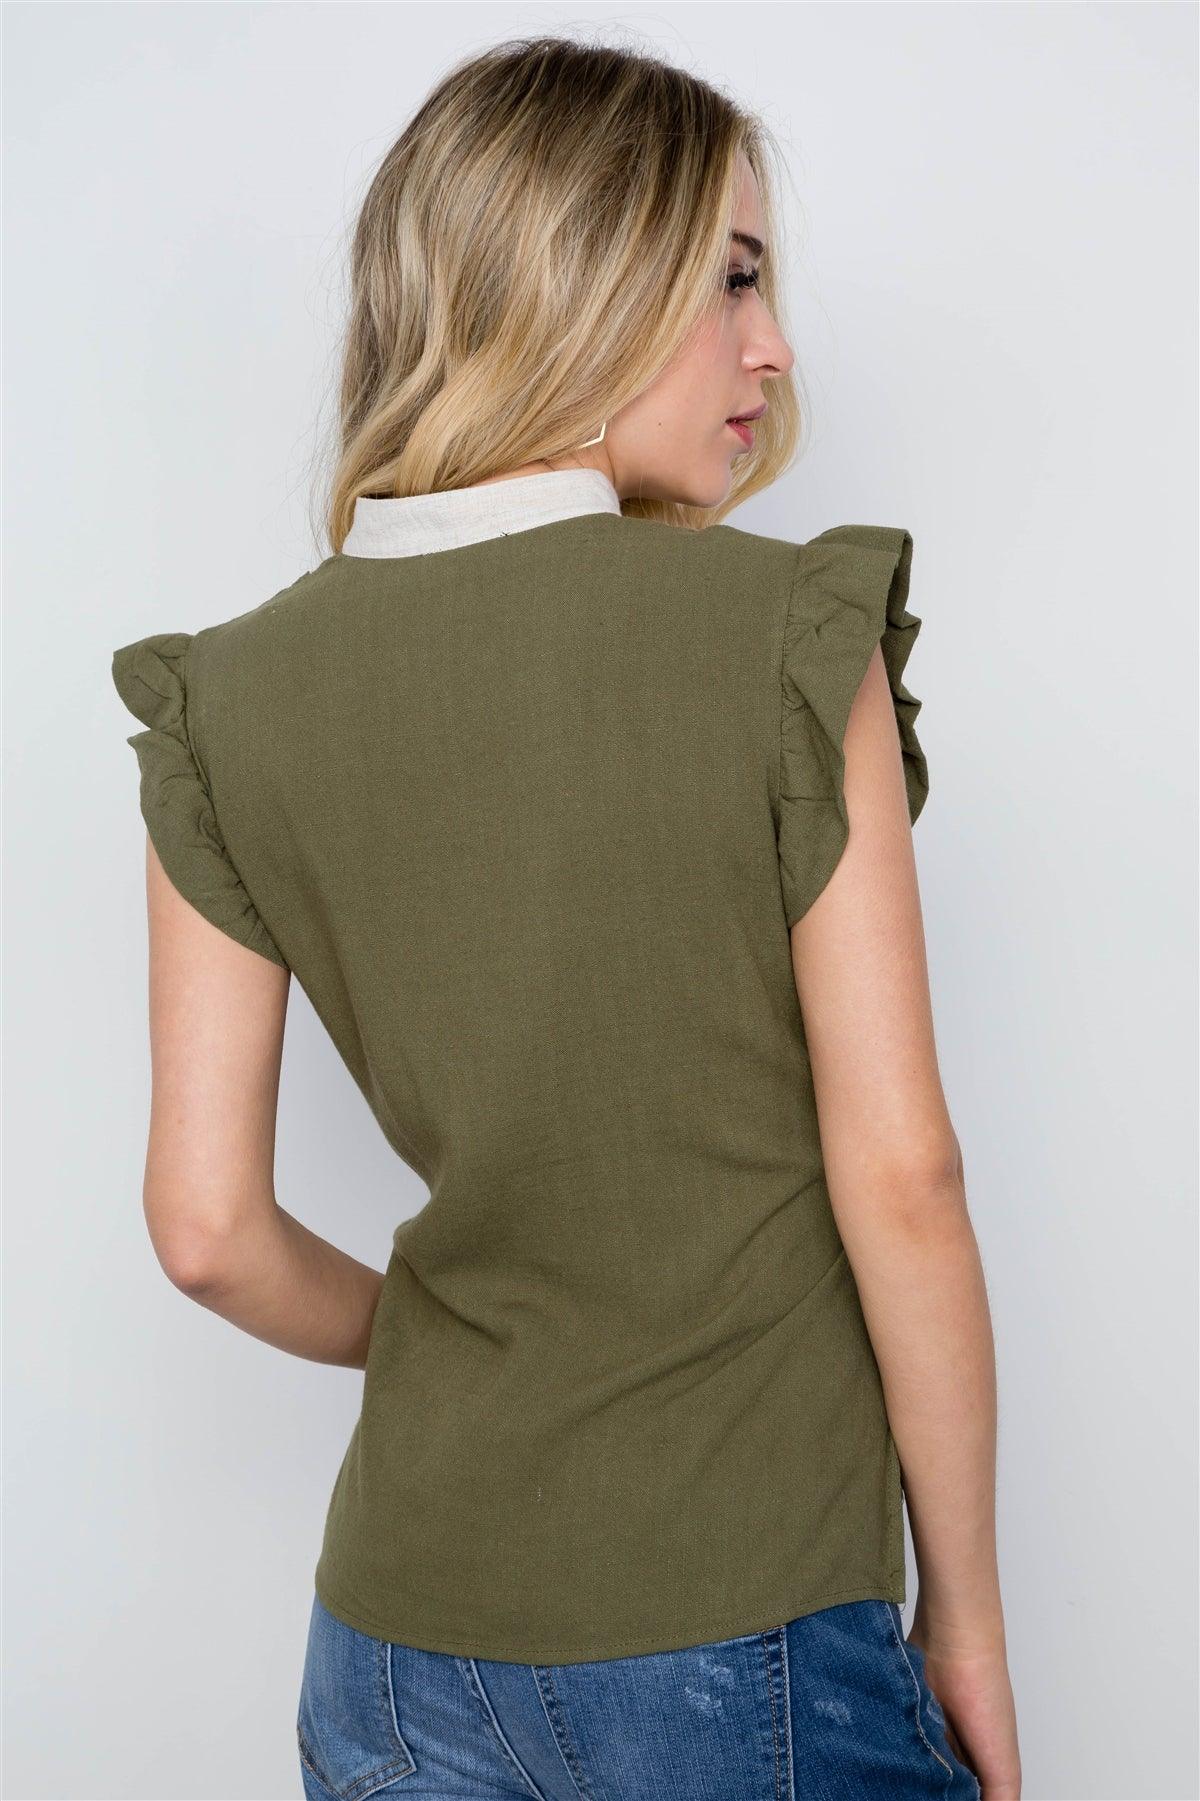 Olive Tie Front Ruffle Sleeve Boho Top /2-2-2